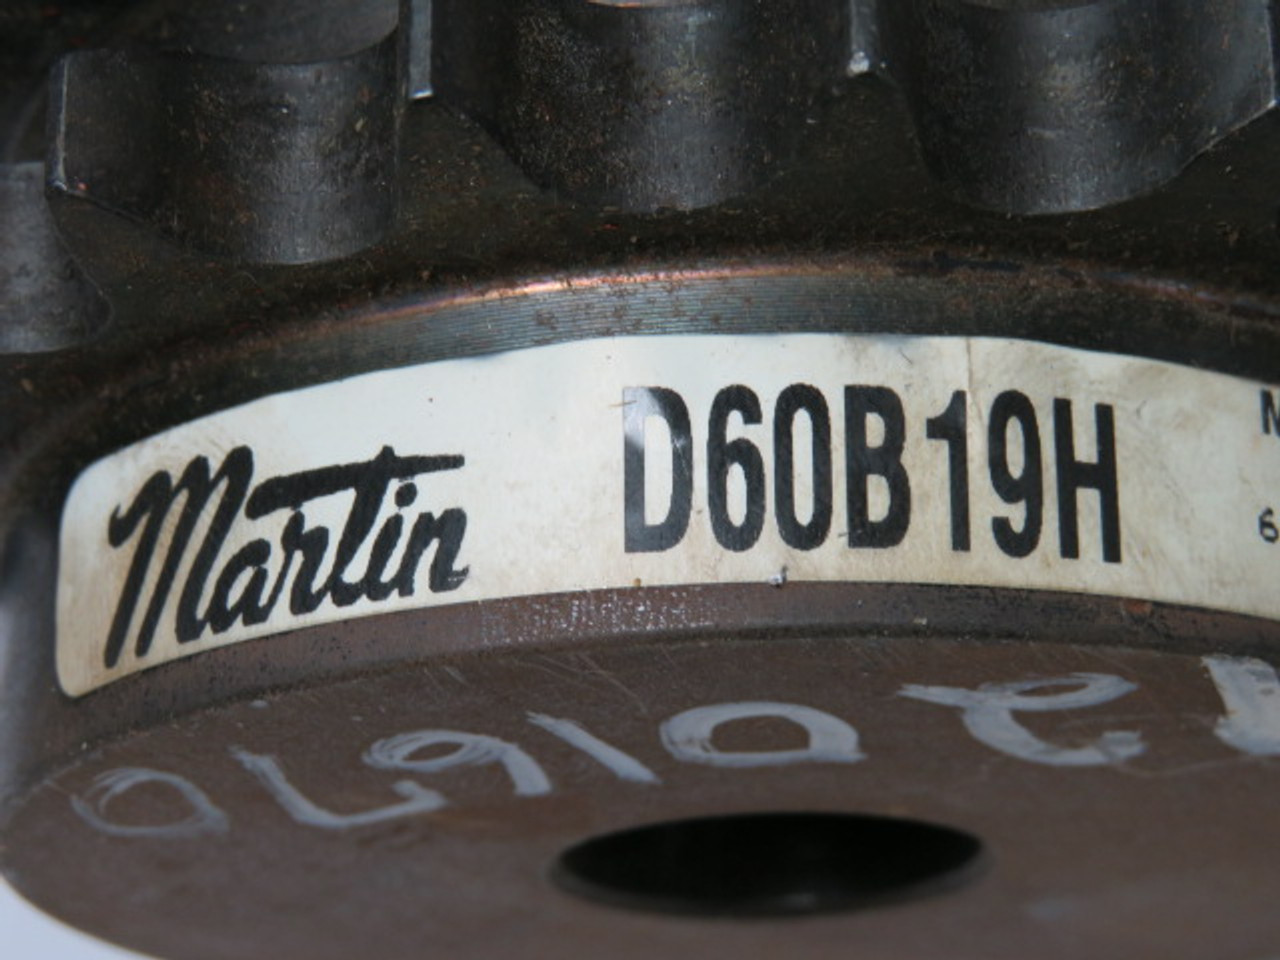 Martin D60B19H Double Sprocket 1" Bore USED